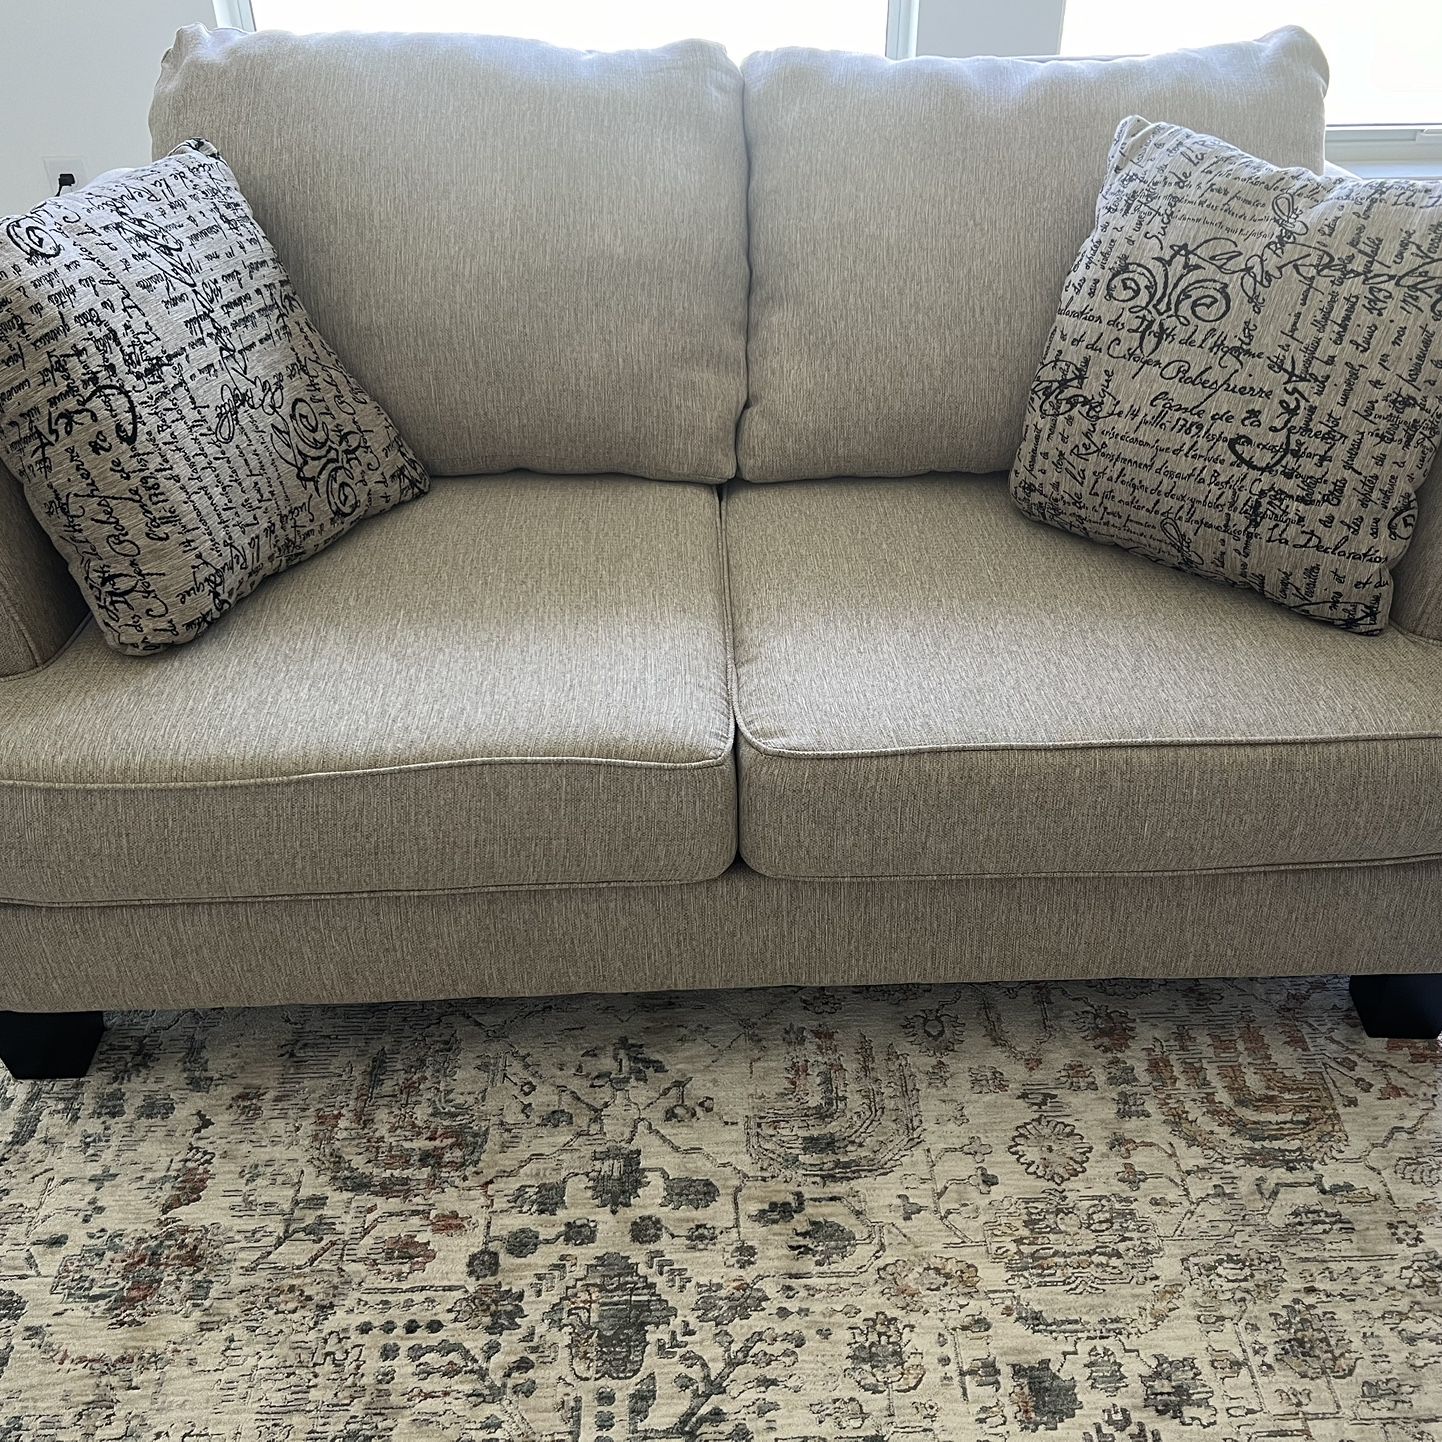 Sofa and Loveseat For Sale